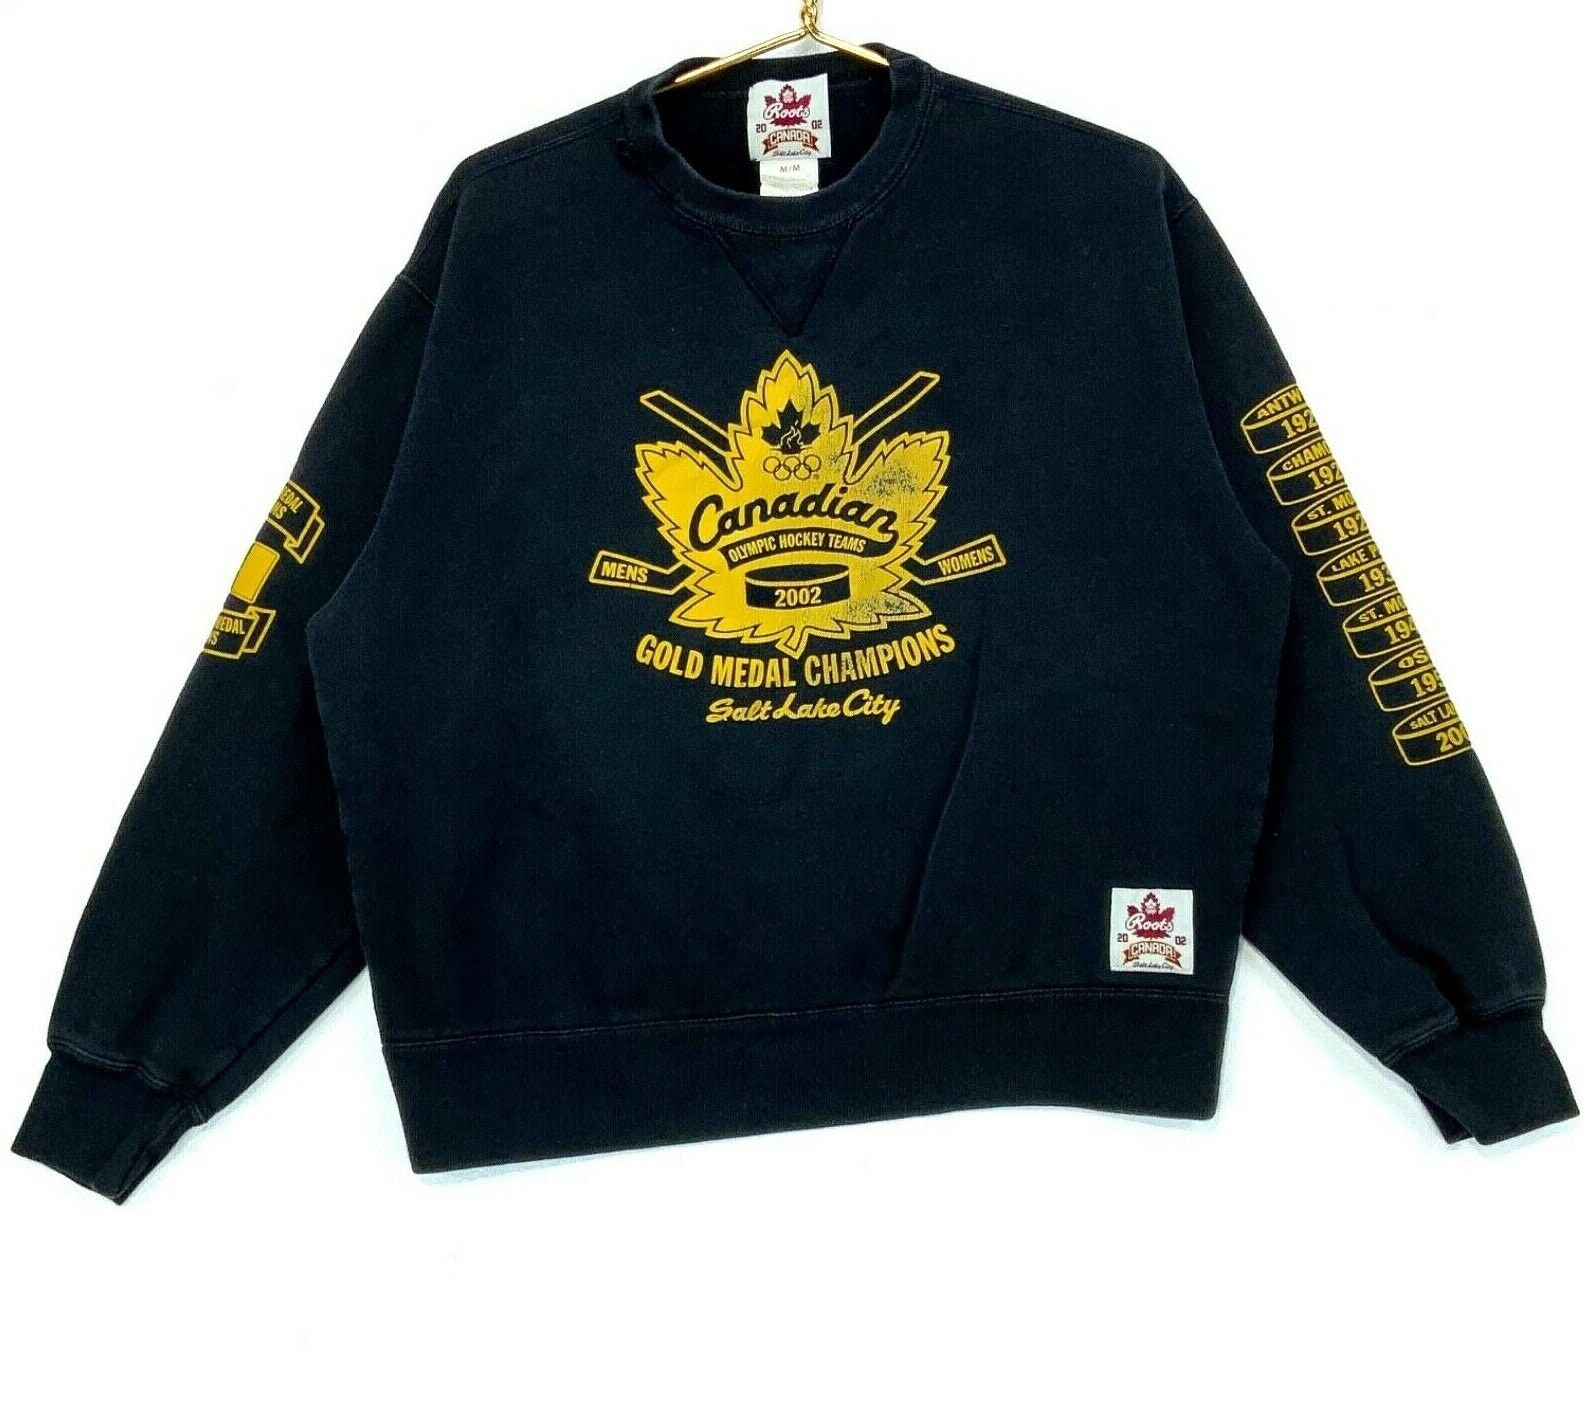 Team Canada 2002 Gold Medal Champions Roots Hockey Jersey